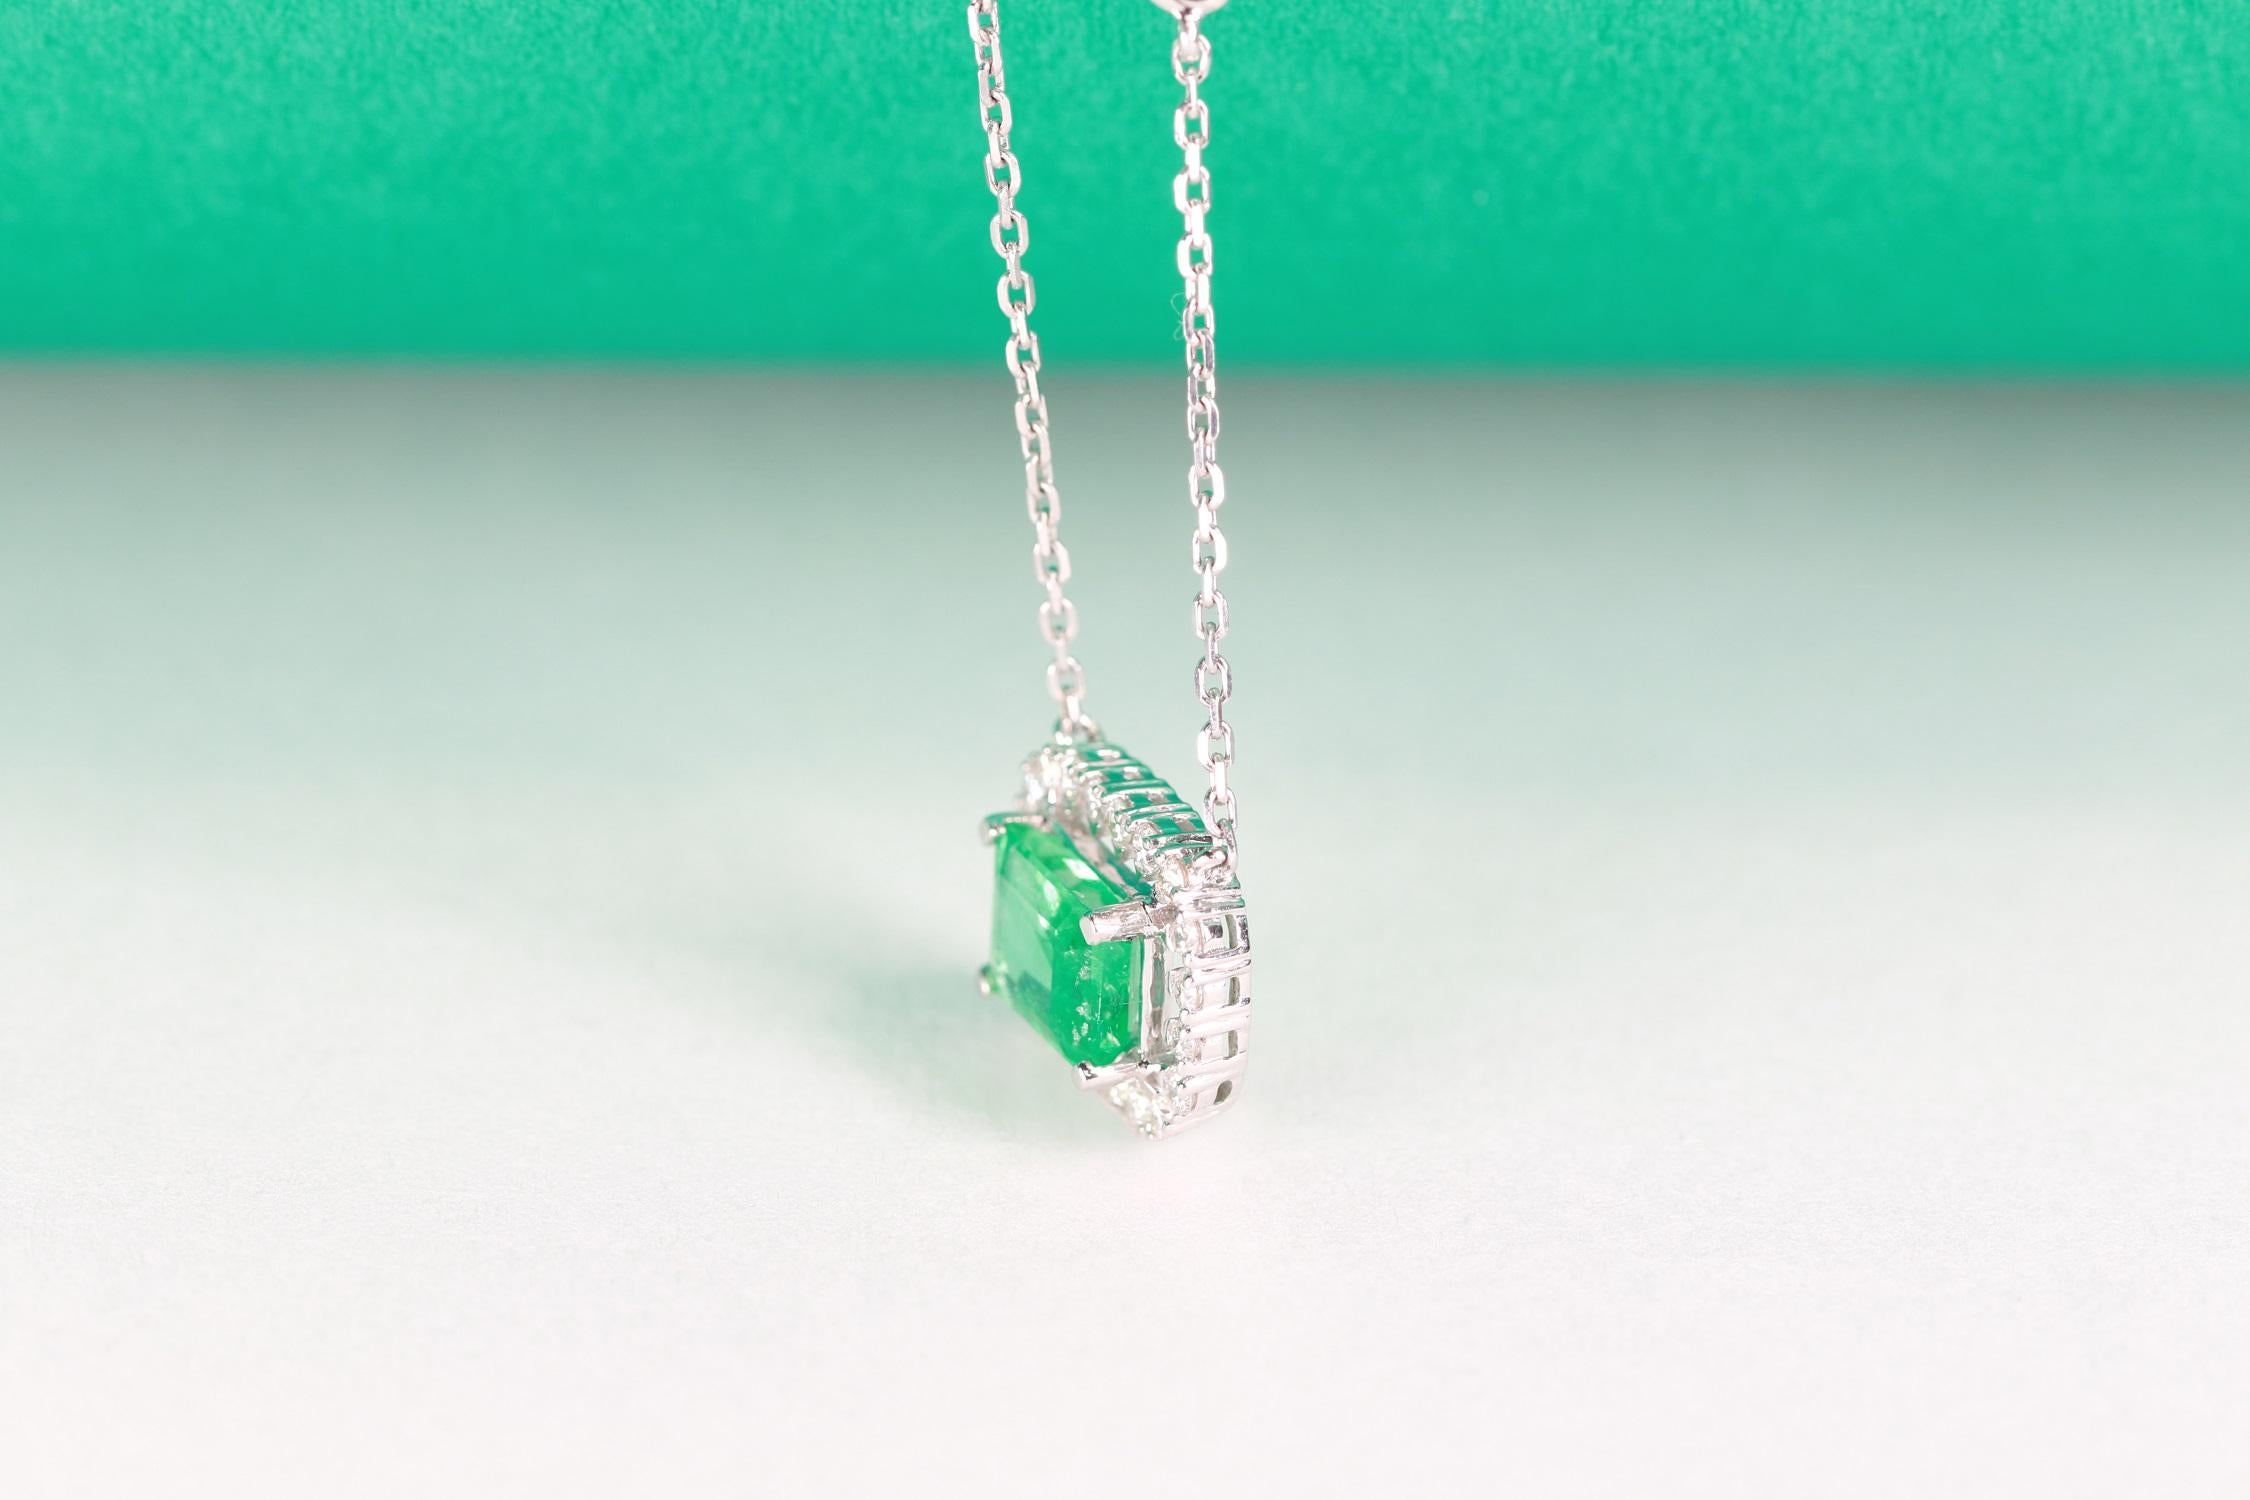 Decorate yourself in elegance with this Pendant is crafted from 18-karat White Gold by Gin & Grace Pendant. This Pendant is made up of 7x5 mm Emerald-Cut Prong setting Emerald (1 Pcs) 0.95 Carat and Round-Cut Prong setting White Diamond (22 Pcs)